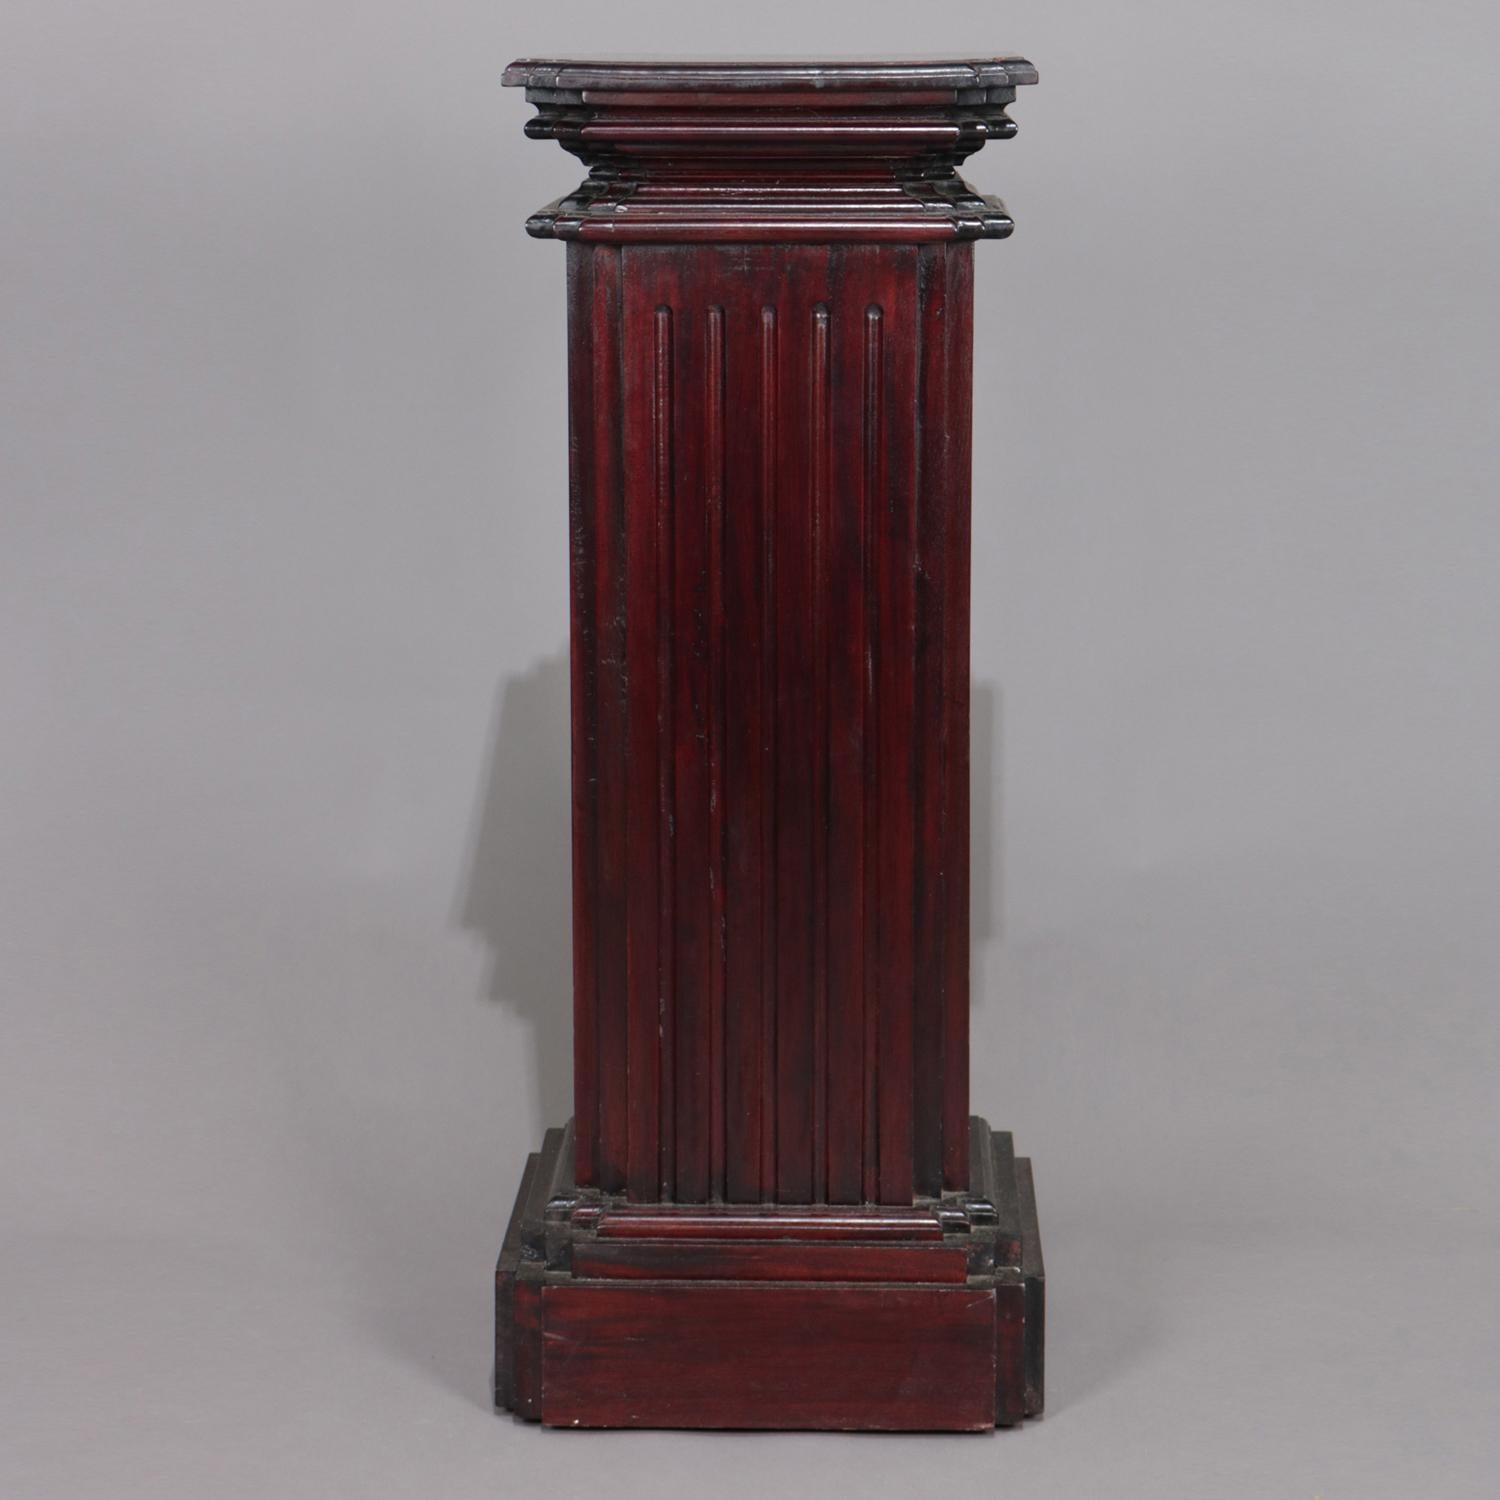 Corinthian column sculpture display stand features carved mahogany construction in square from with stepped base and display and having reeded pedestal, 20th century

Measures: 37